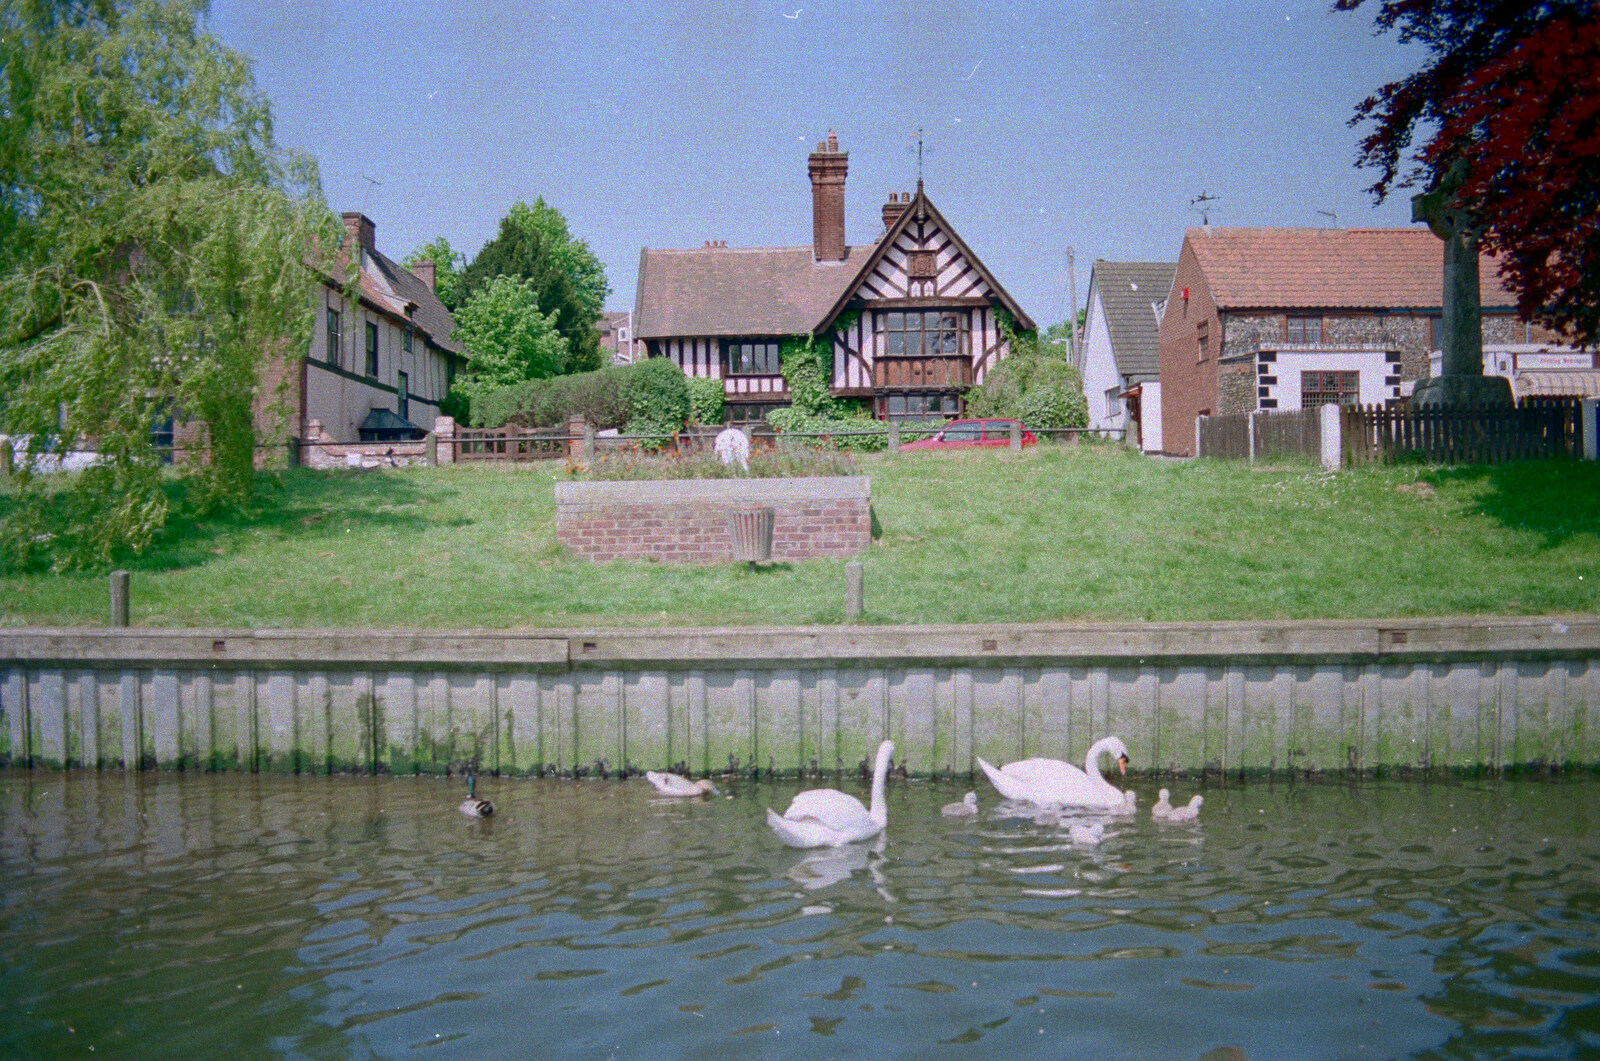 Swans float about on the Yare from The Plymouth Gang Visits Nosher in the Sticks, Red House, Buxton, Norfolk - 20th May 1988